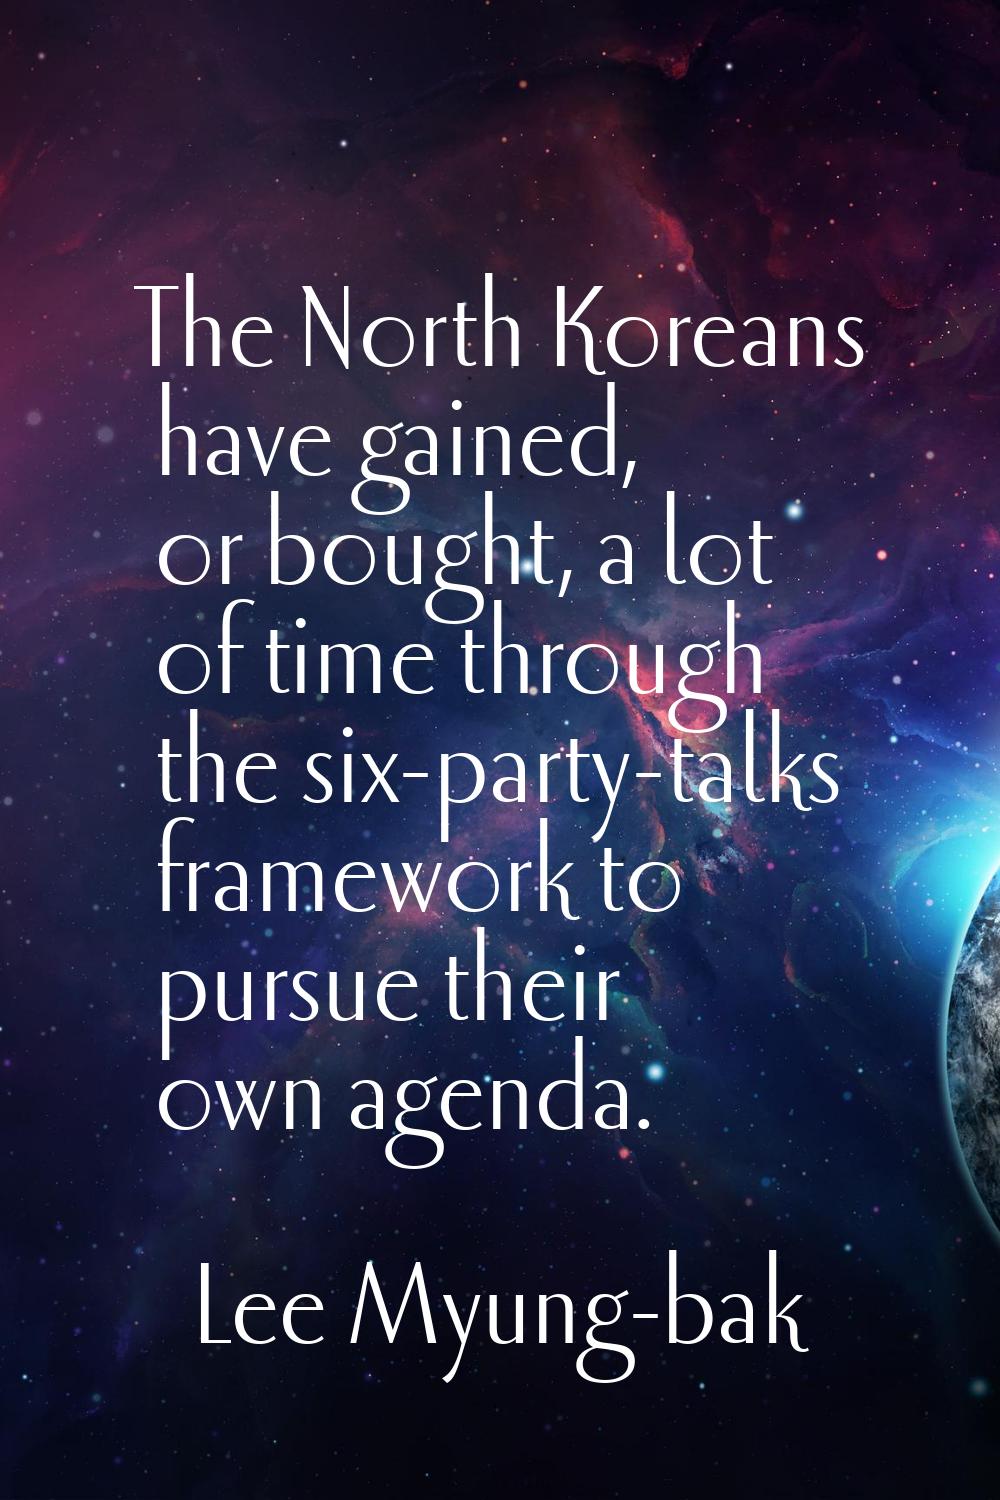 The North Koreans have gained, or bought, a lot of time through the six-party-talks framework to pu